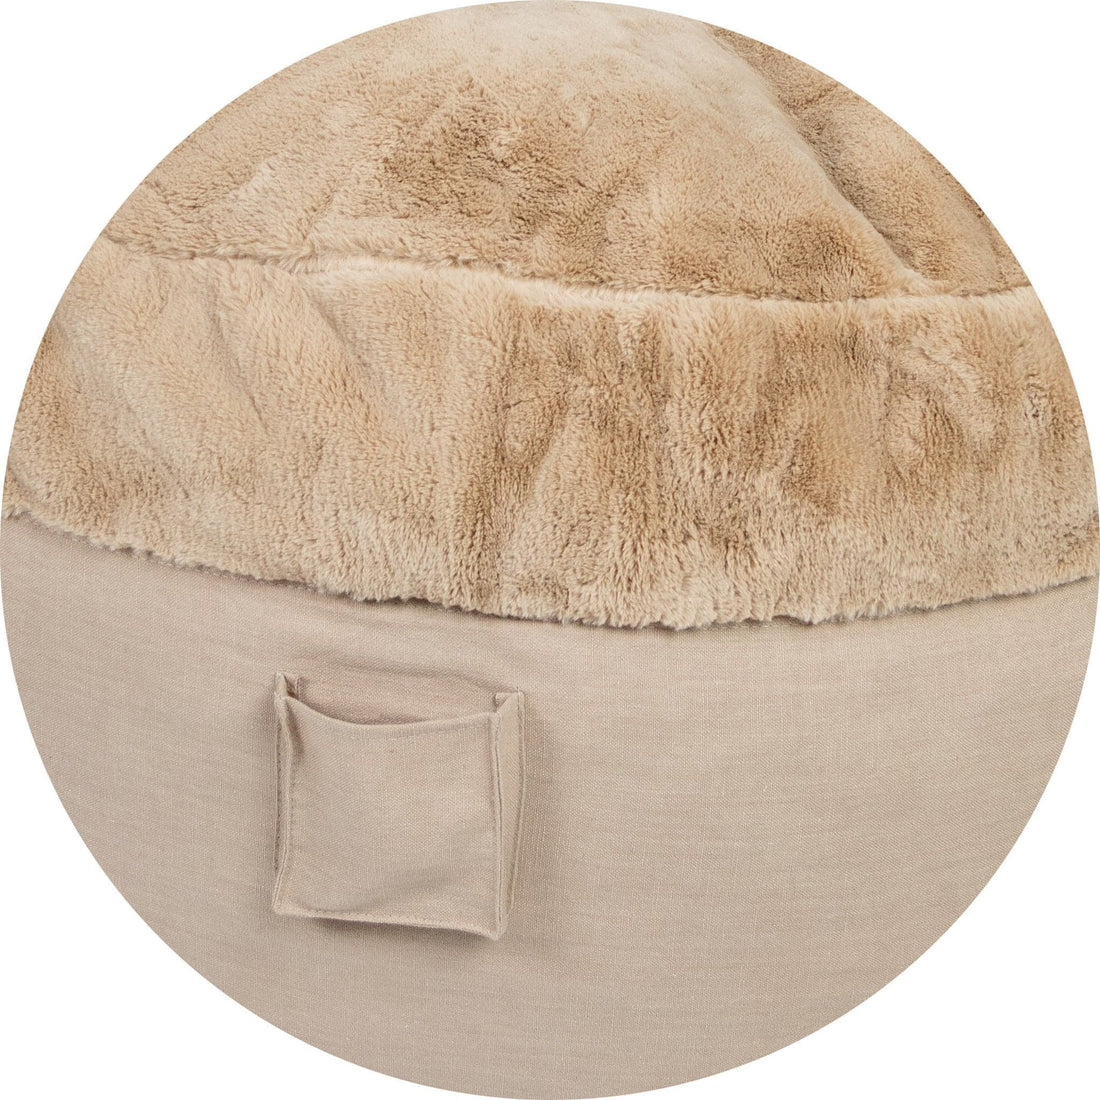 King Cover - NEST Bunny Fur w/ Pillow